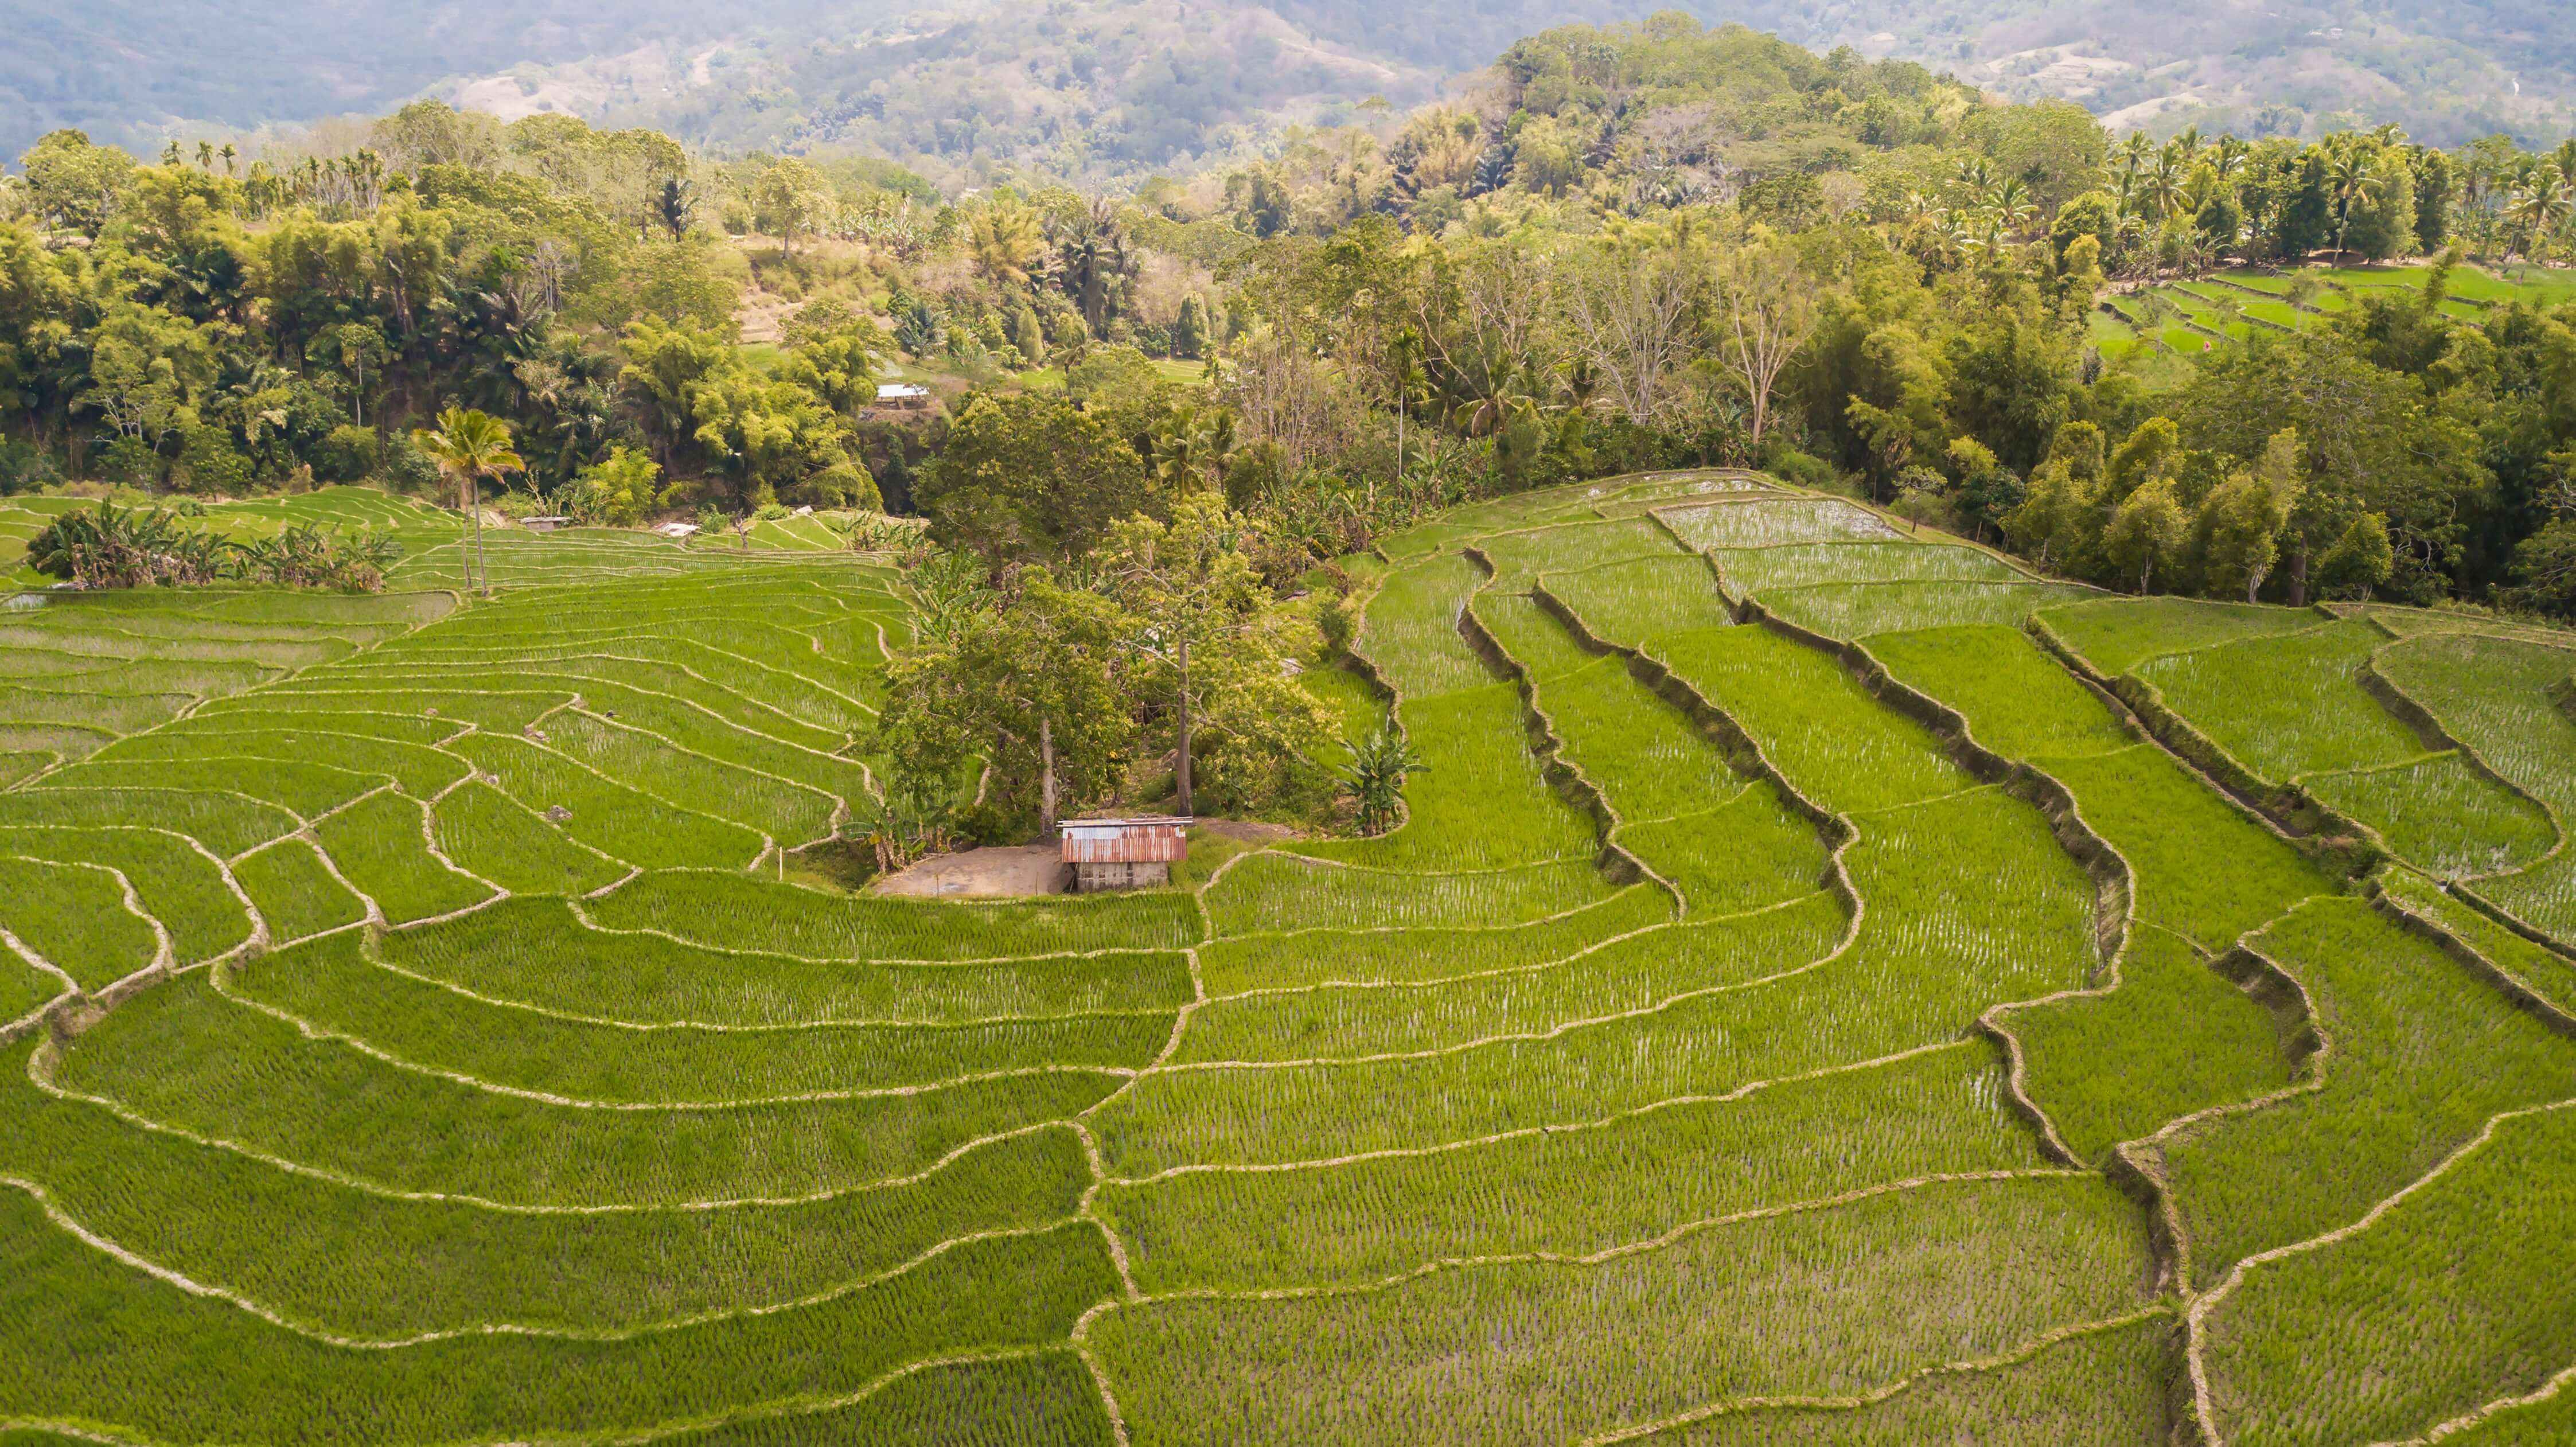 Despite its proximity to Mount Kelimutu, the charms of Detusoko village have long been overlooked. But now, RMC Detusoko is inviting travellers to experience life with Lio farmers in the Ende highlands, offering insight to the ecological and spiritual practices underpinning their culture. Photo by Andra Fembriarto